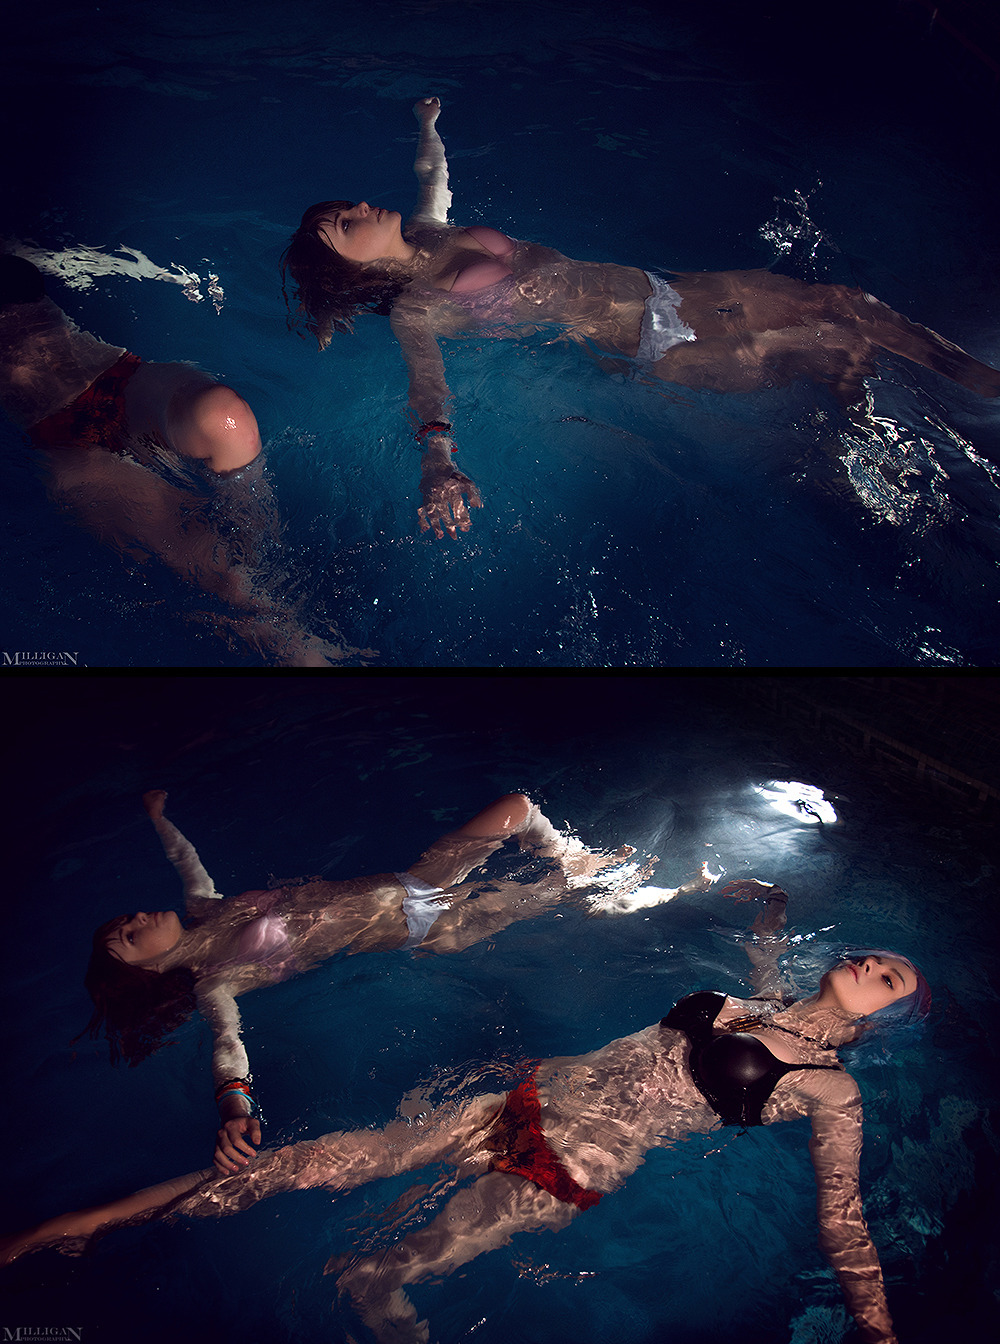   Life is Strange Why look, an otter in my water!  Torie as ChloeAnn as Maxphoto,